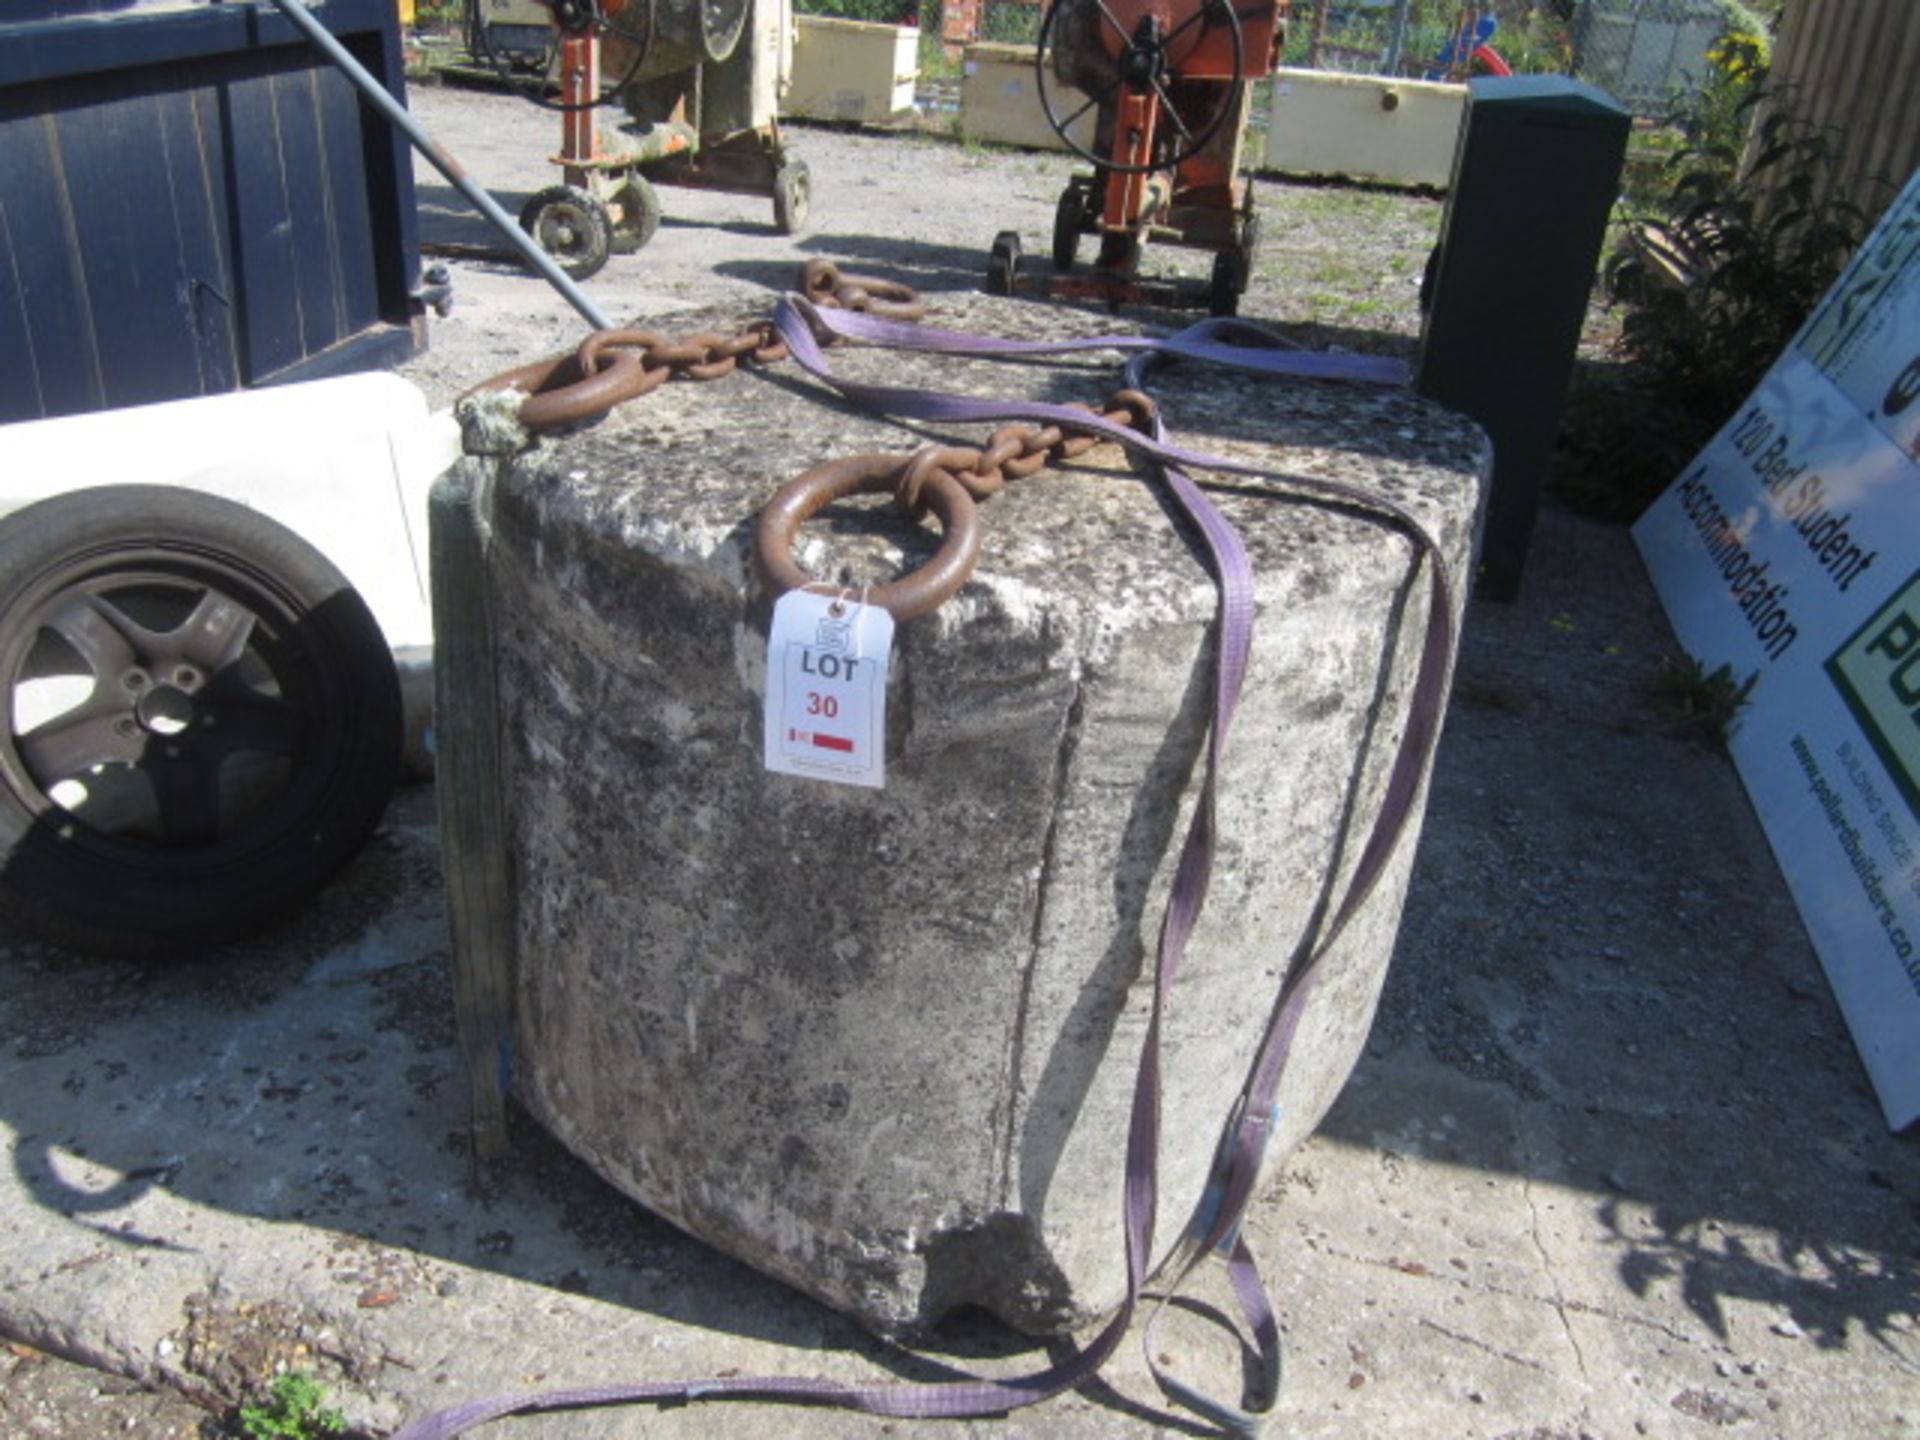 Un-named concrete weight with lifting chains. This item has no record of Thorough Examination. The